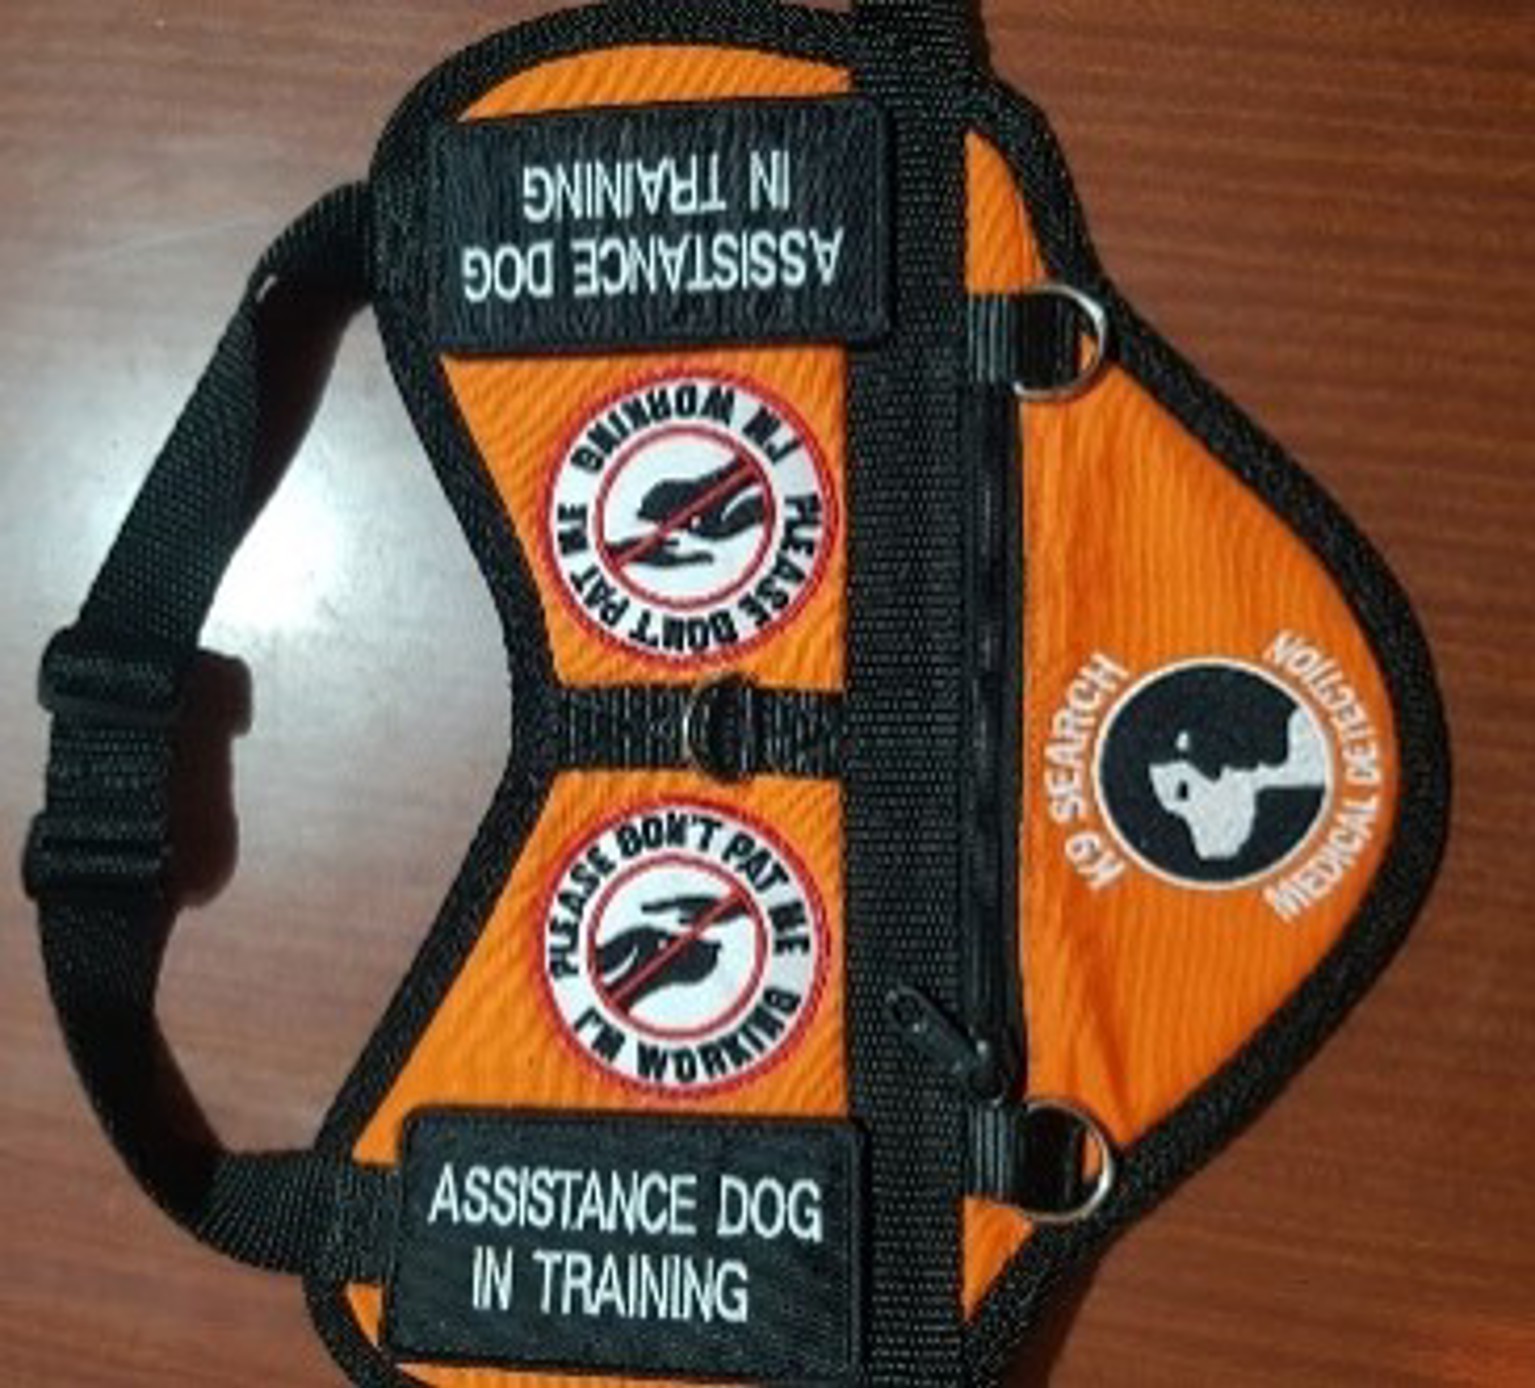 Image showing an orange vest worn by disability assist dogs of the K9 Search medical detection. 